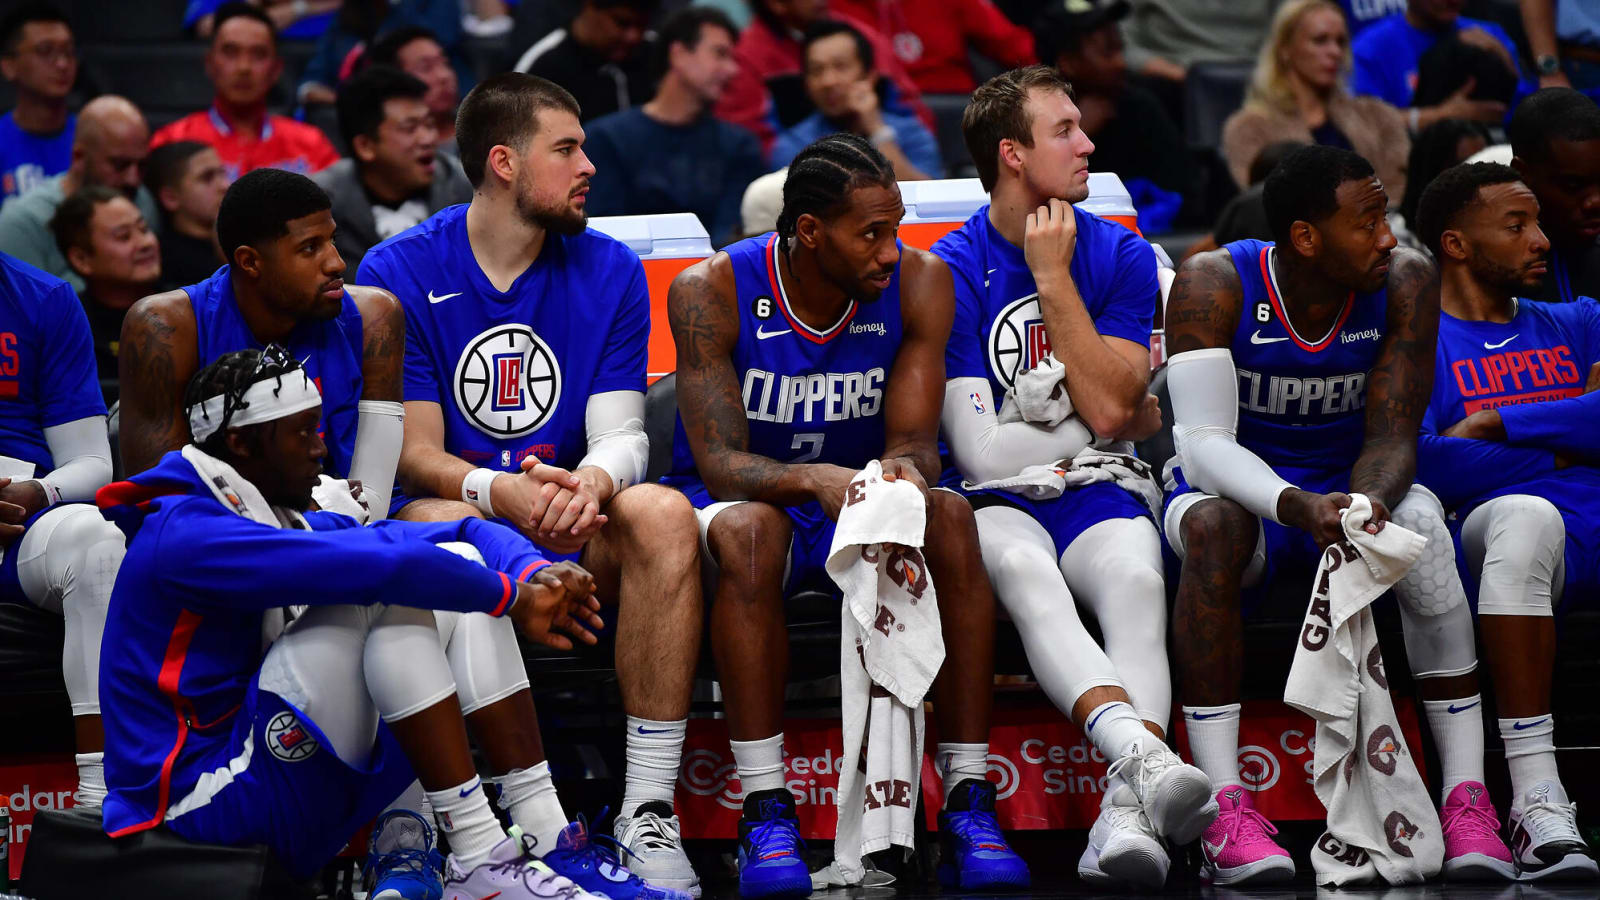 Clippers debut streaming service, but is ClipperVision worth $199 per year?